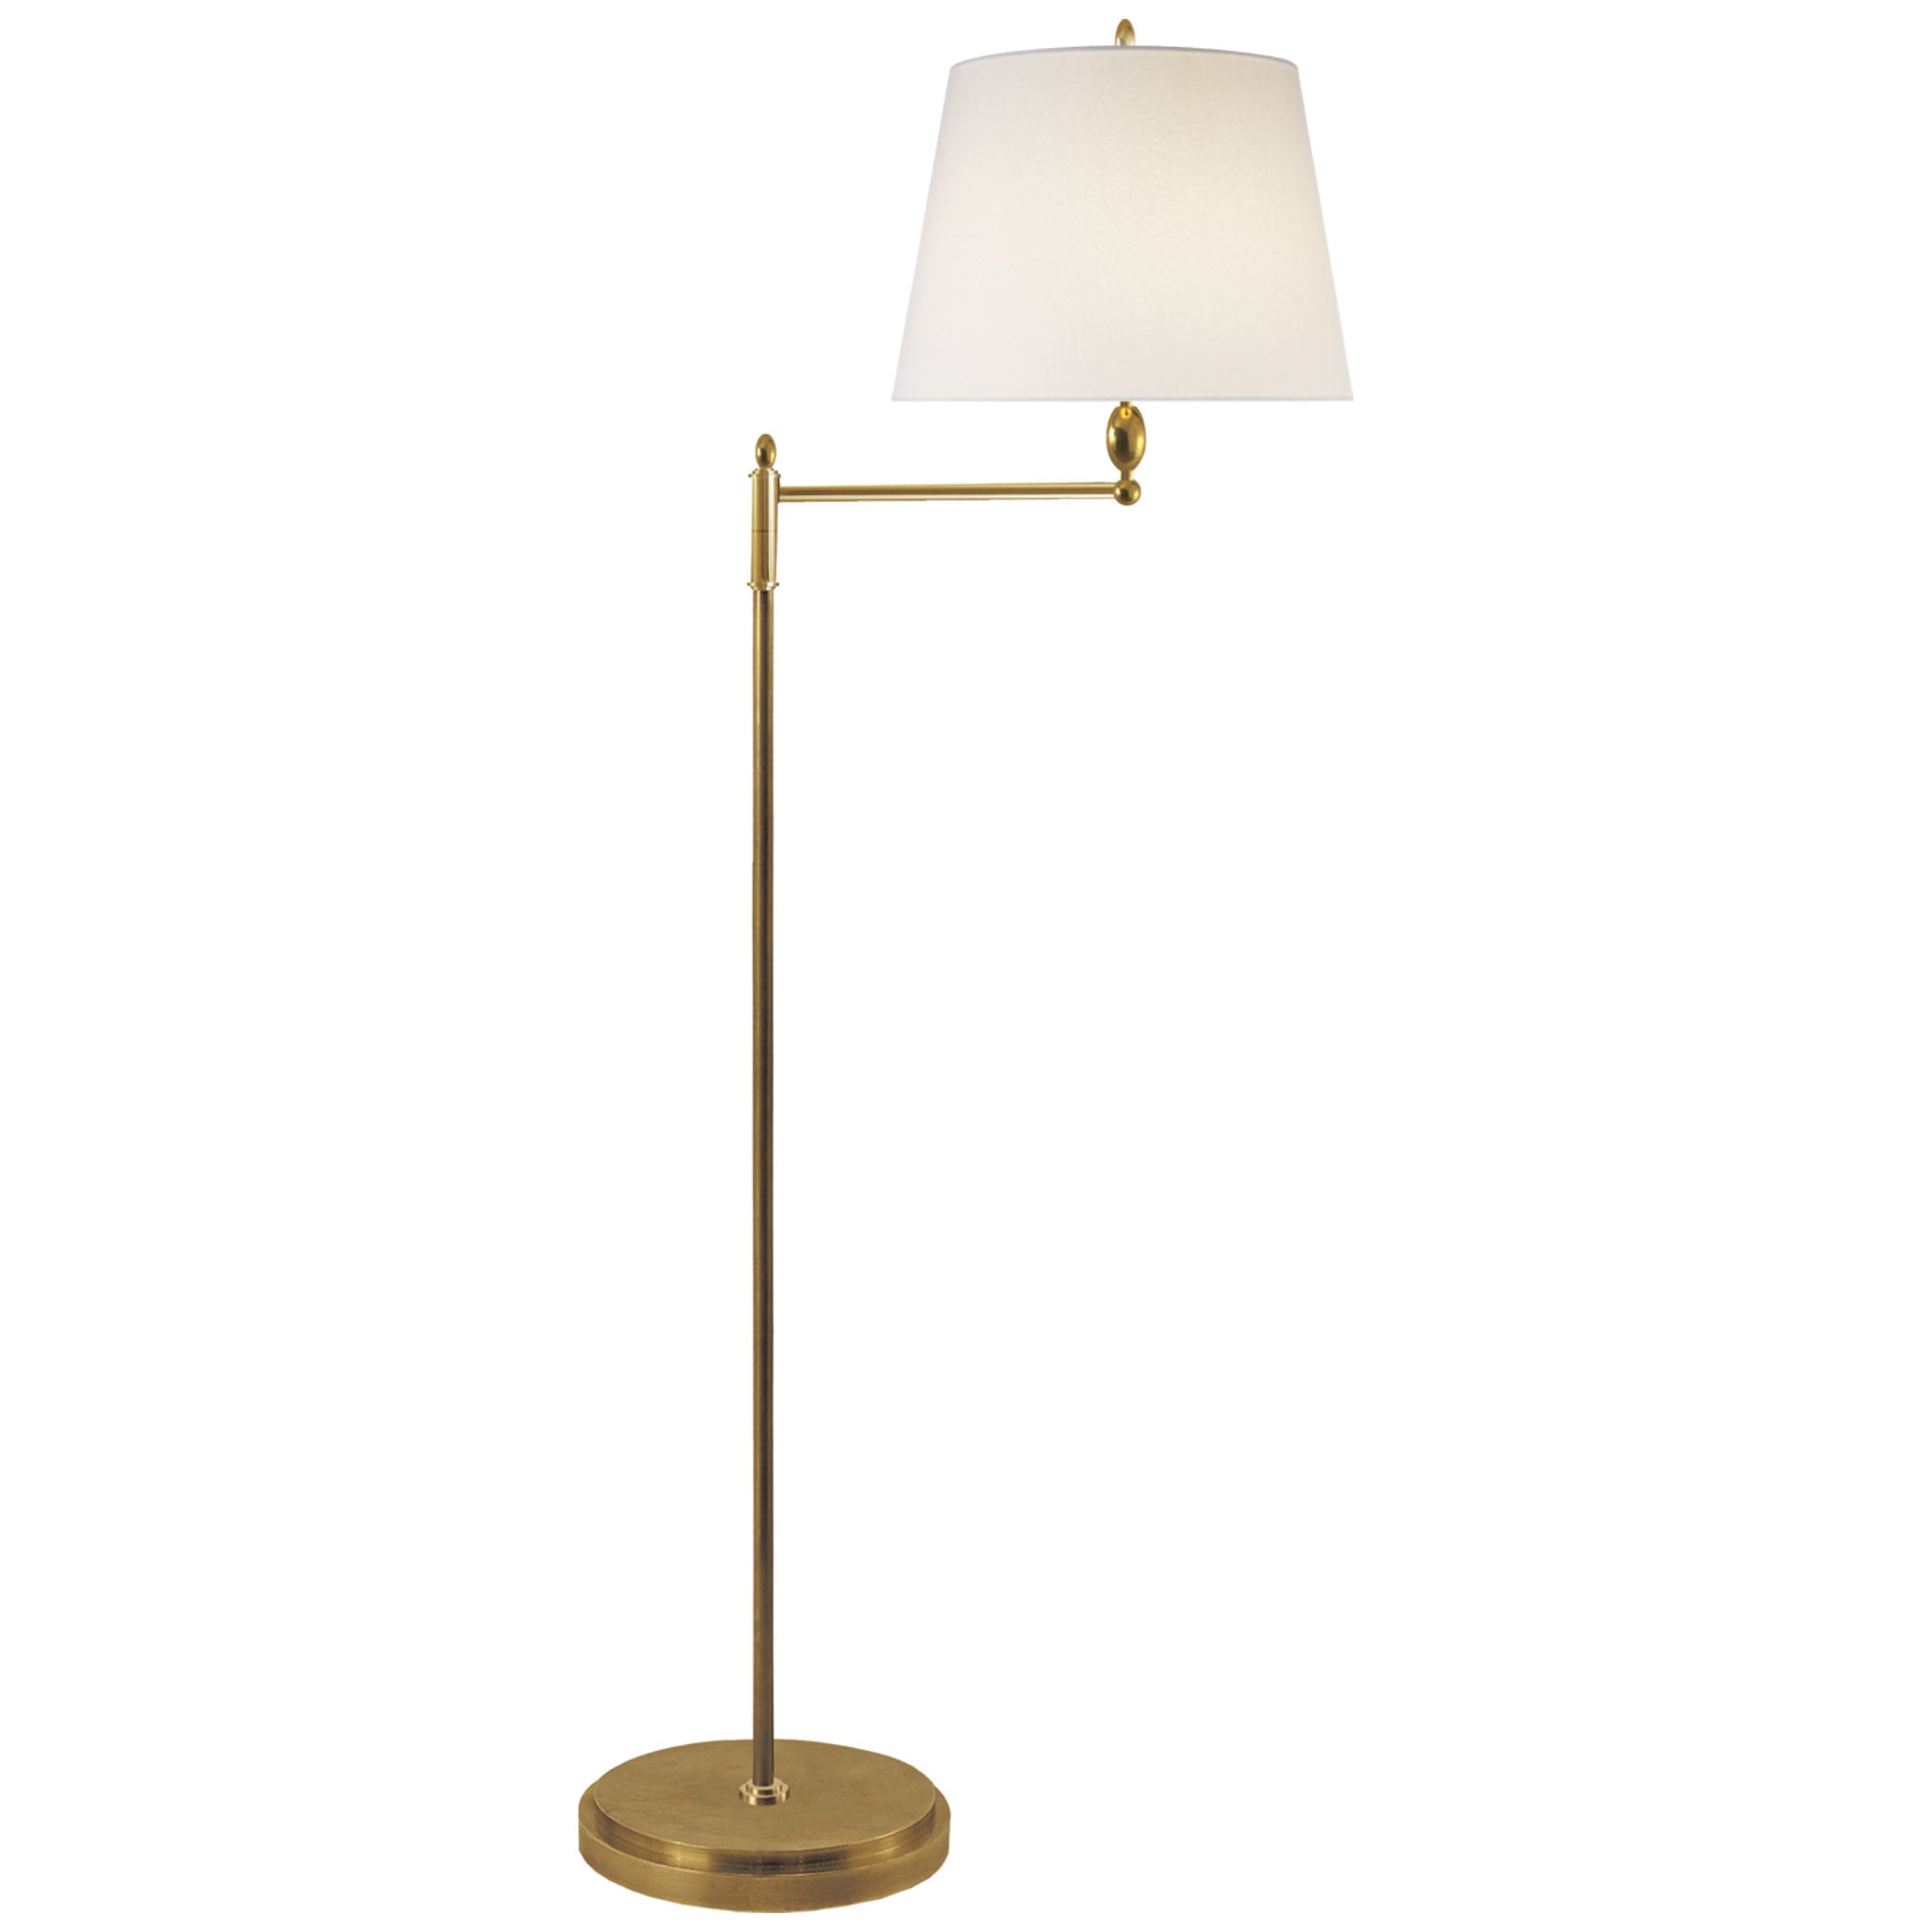 Thomas O'Brien Paulo Floor Light in Hand-Rubbed Antique Brass with Linen Shade